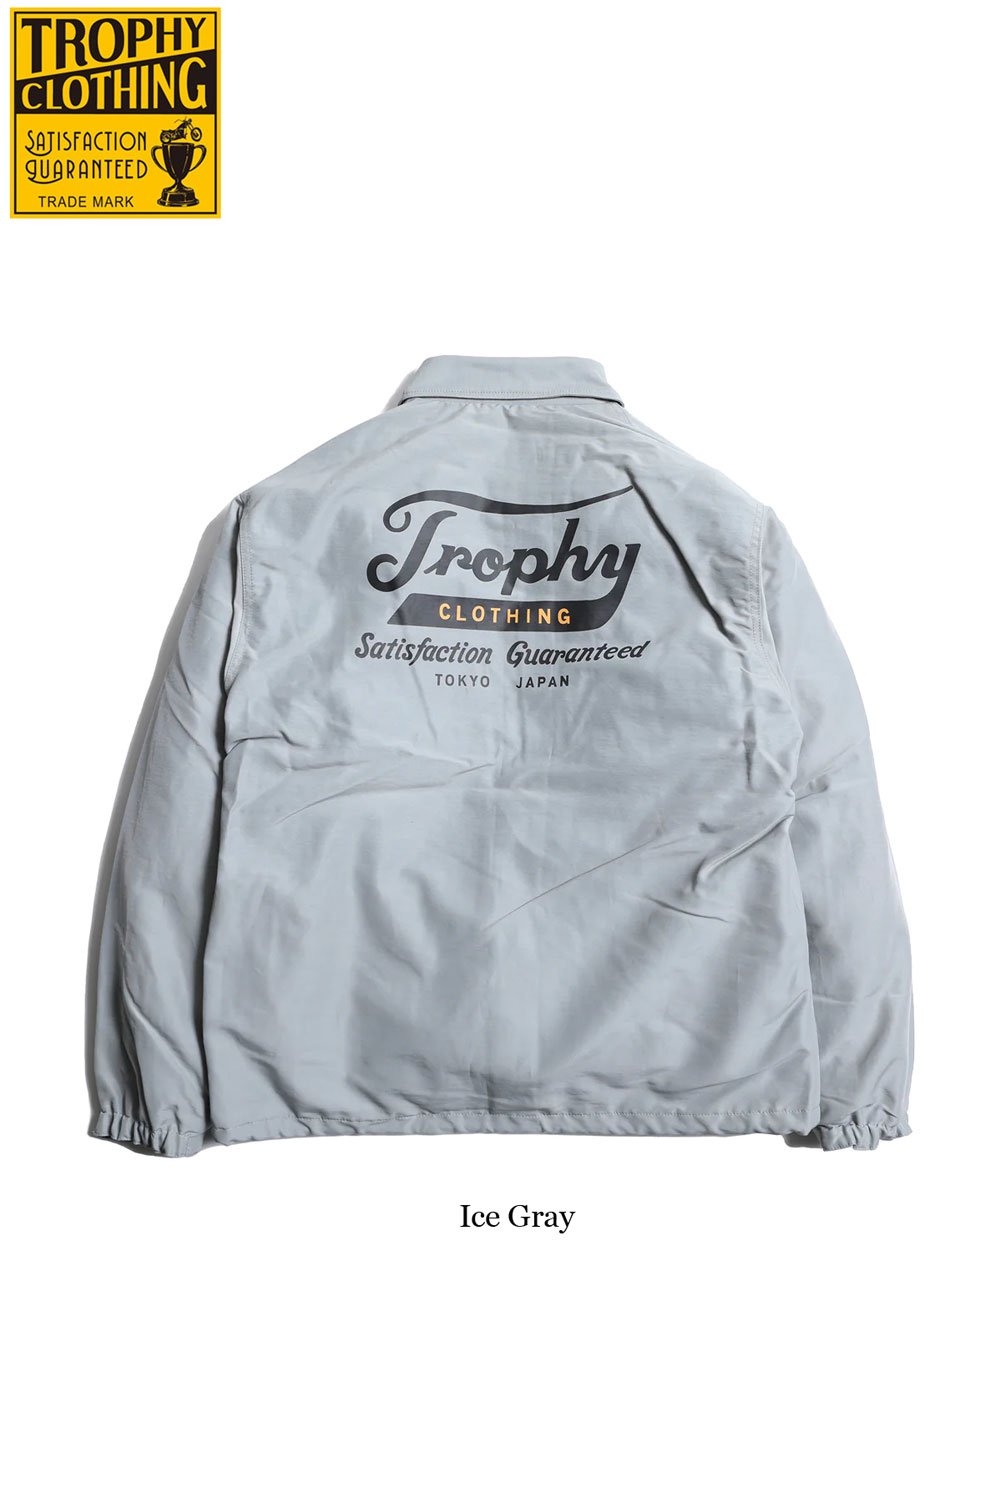 TROPHY CLOTHING(トロフィークロージング) コーチジャケット Classic Logo Warm Up Jacket  TR23AW-501 通販正規取扱 | ハーレムストア公式通販サイト